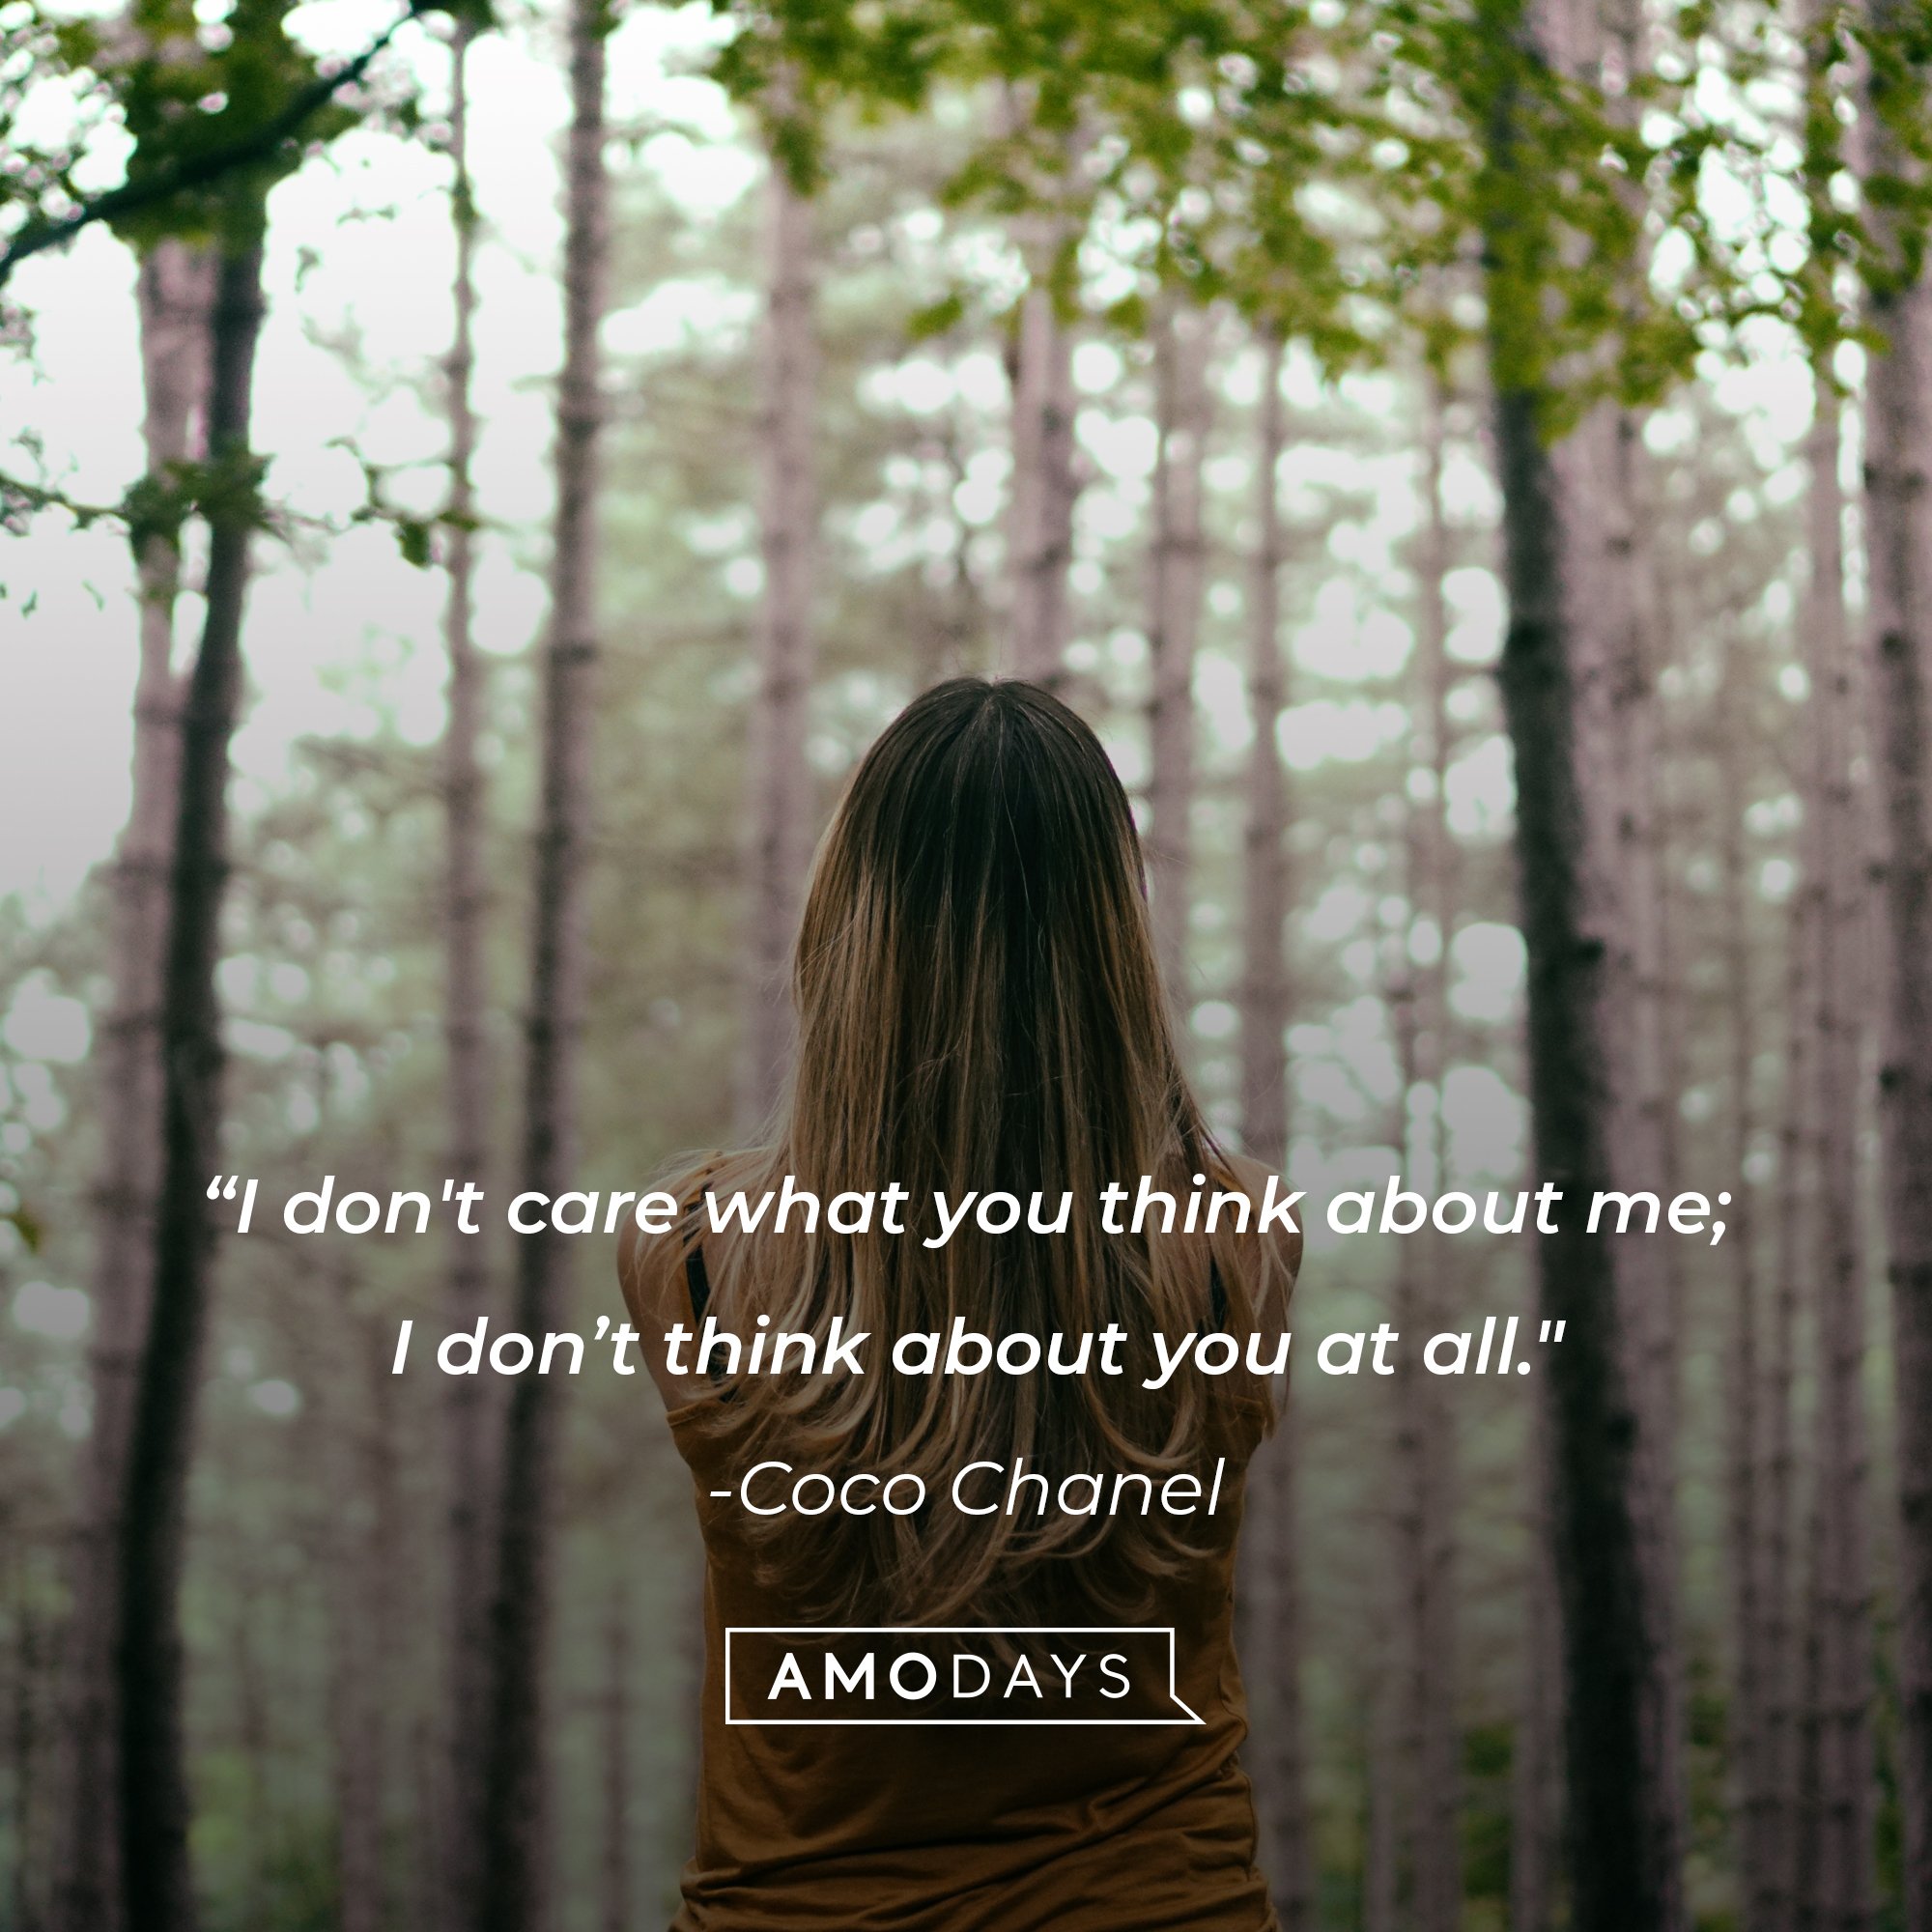 Coco Chanel‘s quote: "I don't care what you think about me; I don't think about you at all." | Image: AmoDays